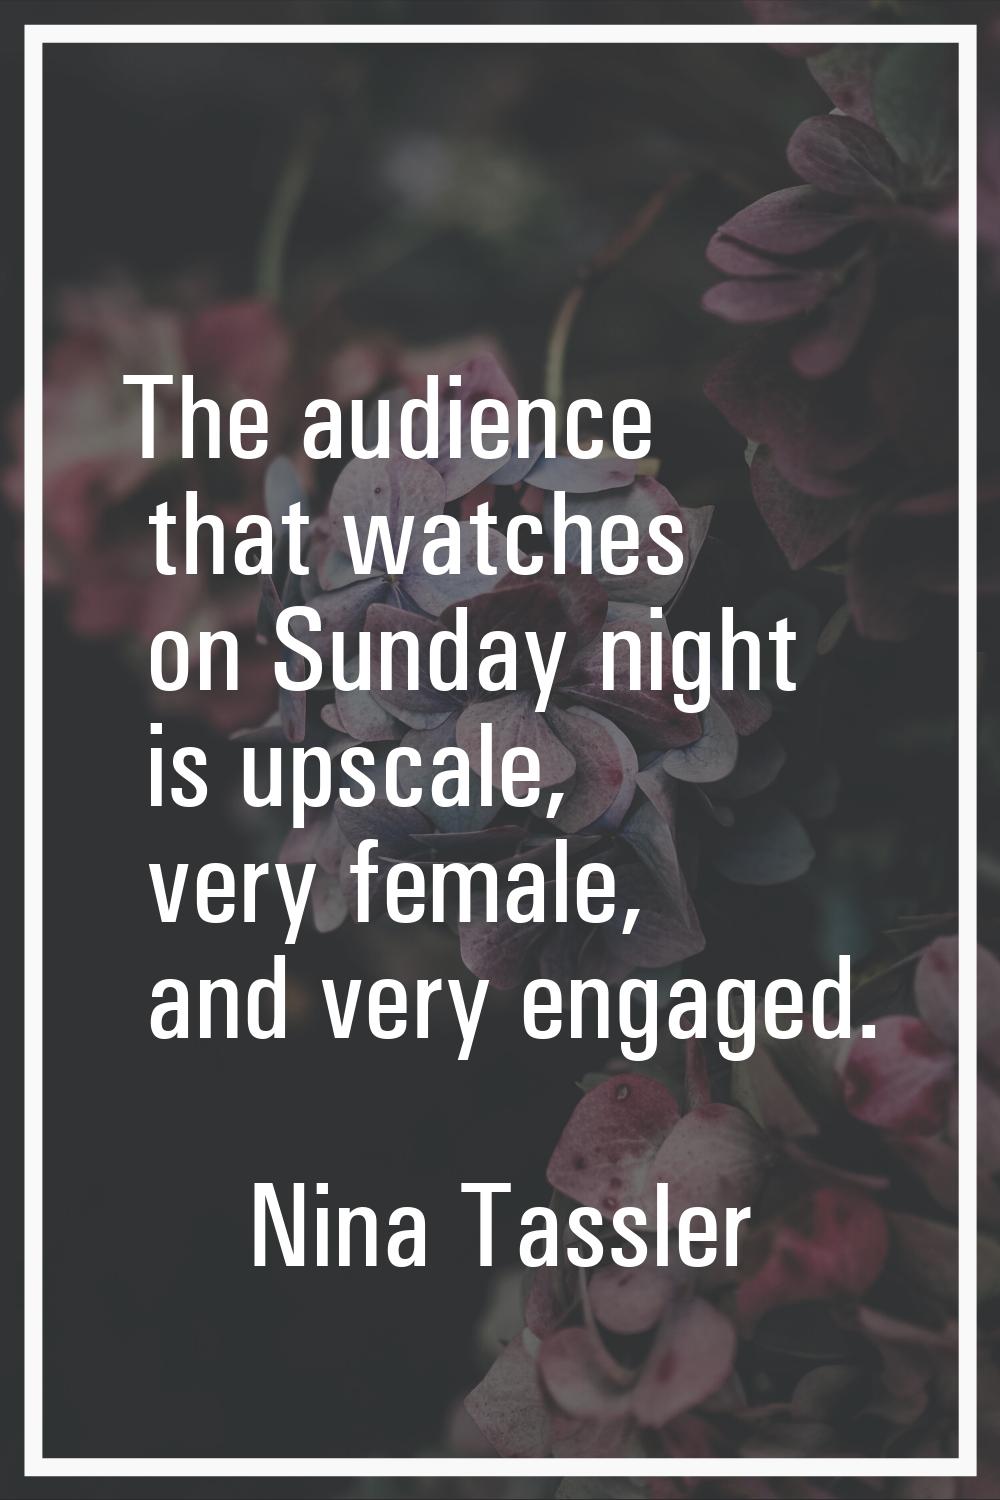 The audience that watches on Sunday night is upscale, very female, and very engaged.